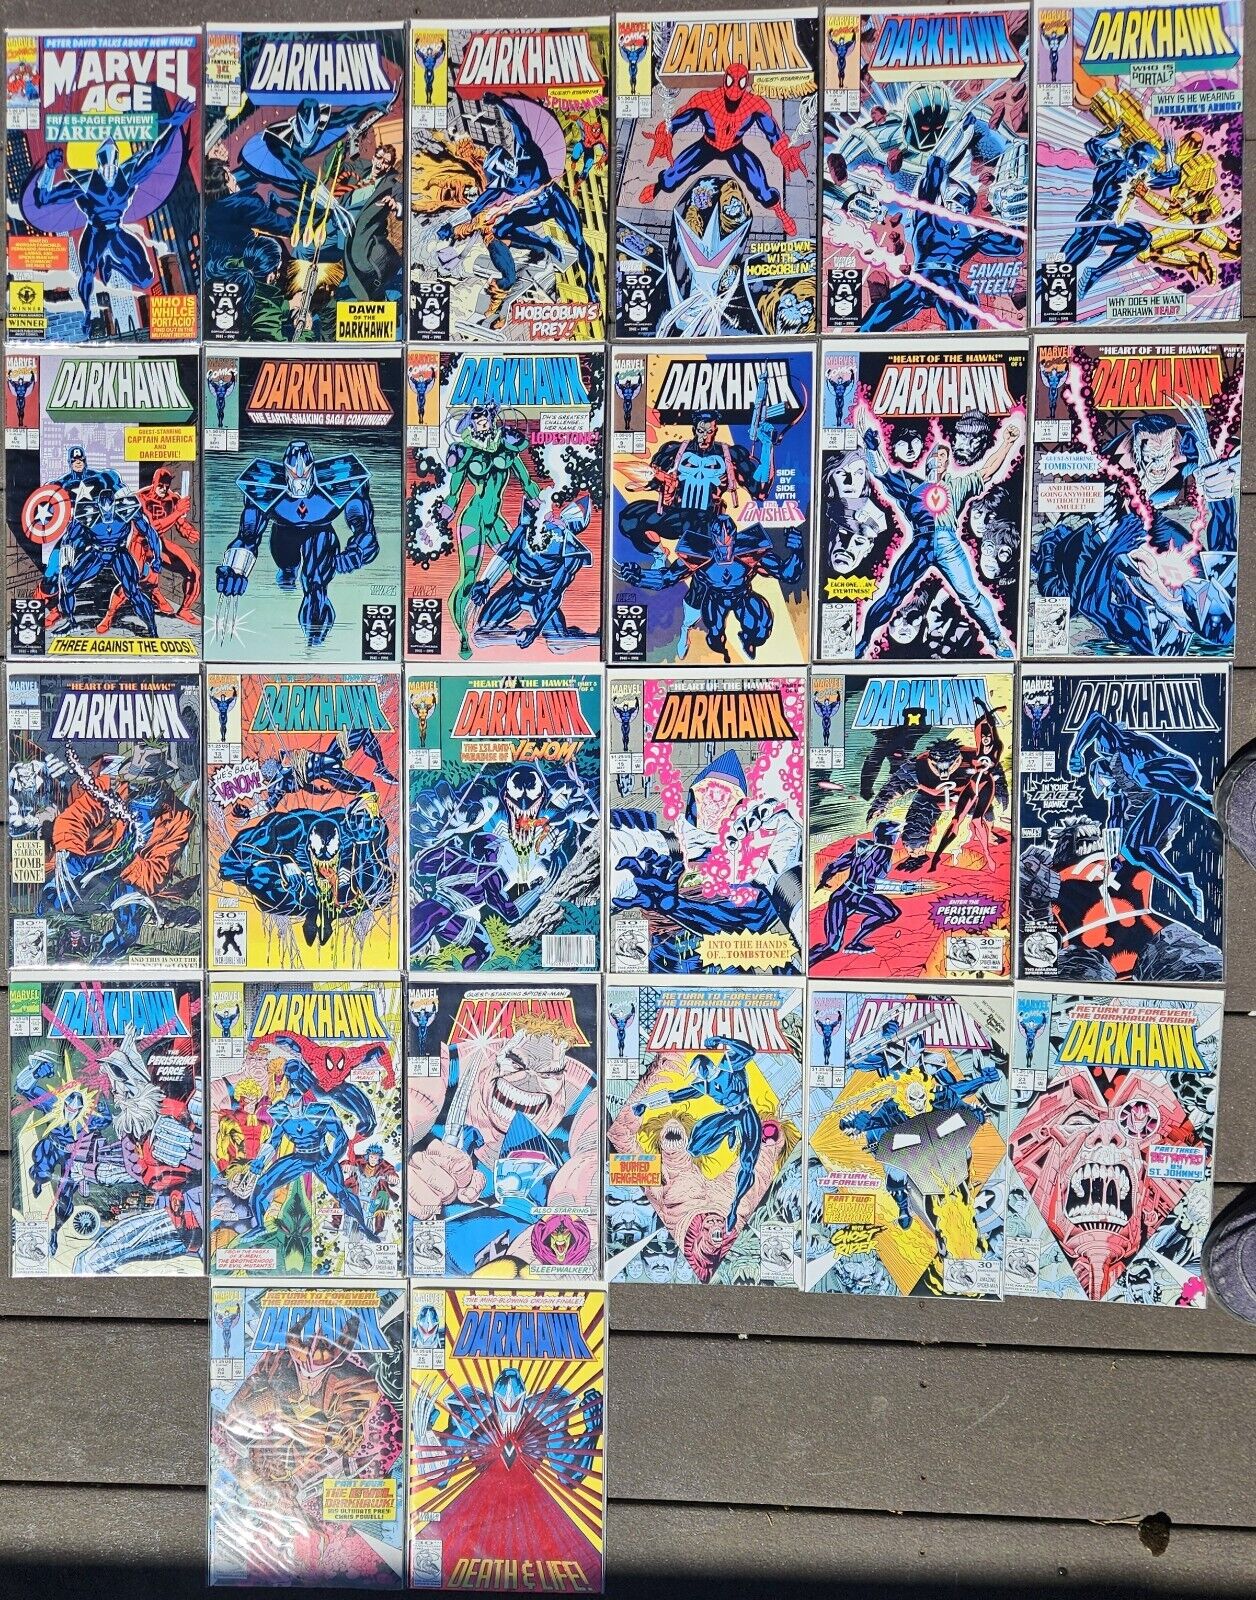 Lot of 26 MARVEL Comics DARKHAWK 1-25 plus Marvel Age Preview Issue 1991 Series